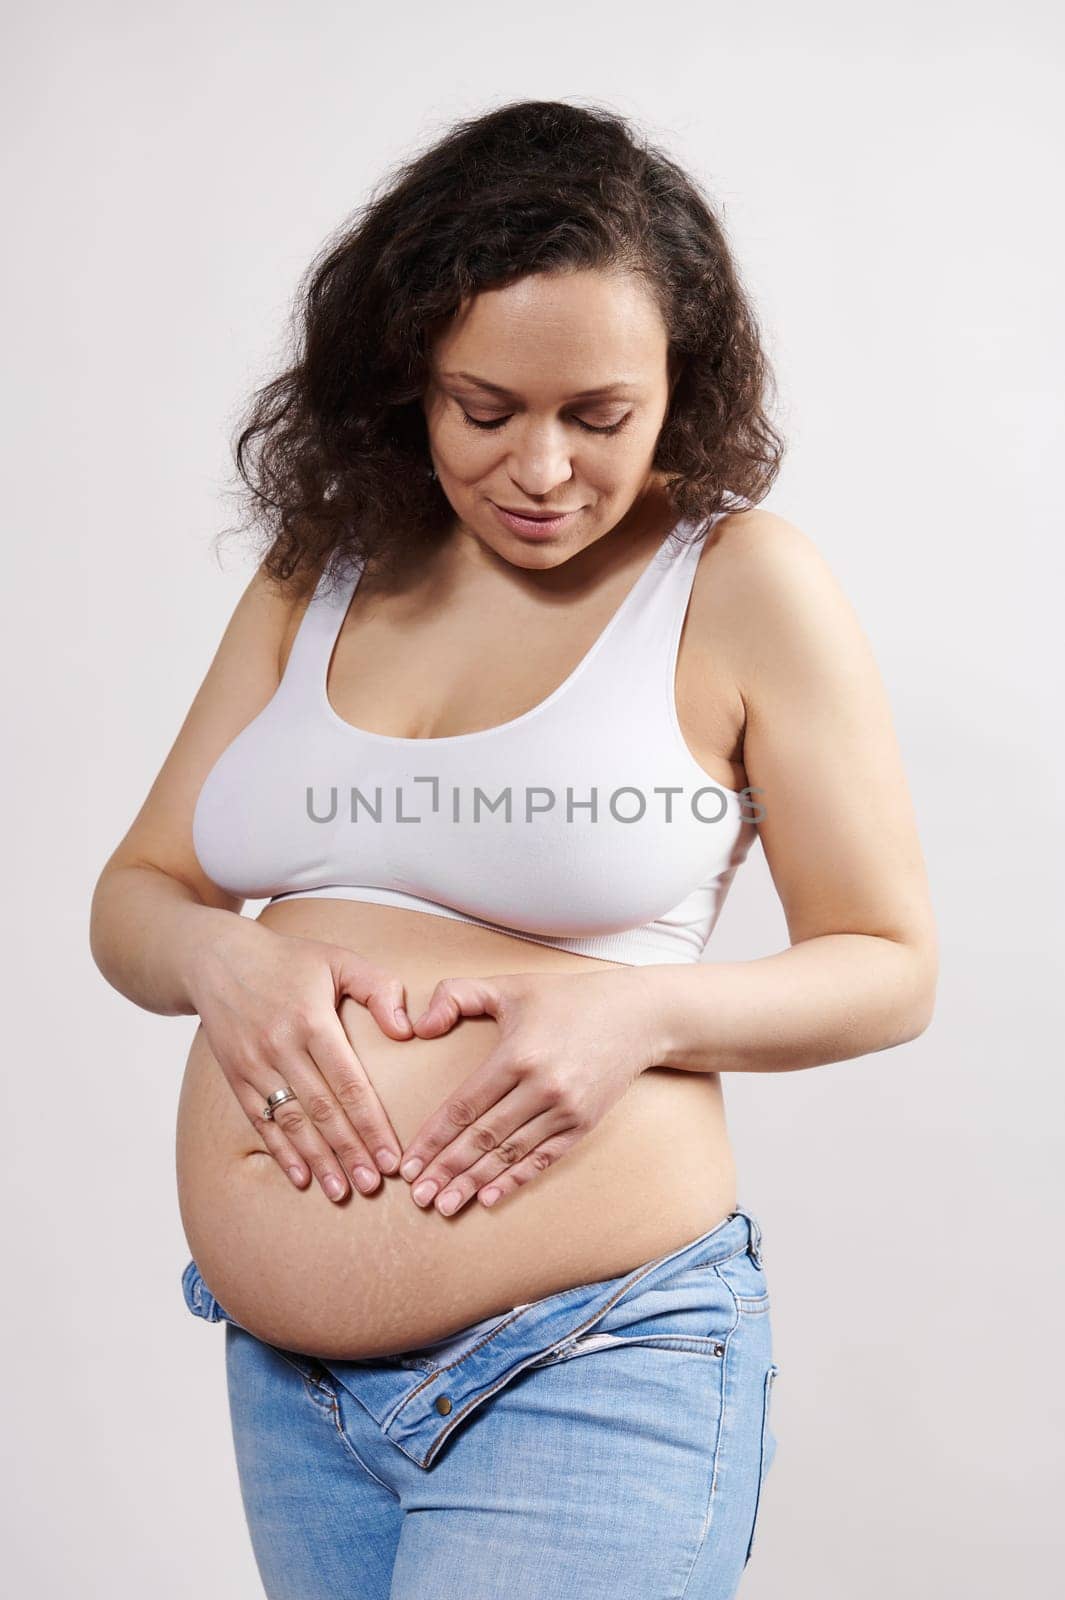 Young pregnant woman in white underwear and denim jeans, putting her hands on her belly, making heart shape, isolated on white background. Delightful gravid female expecting a baby. Pregnancy 24 week